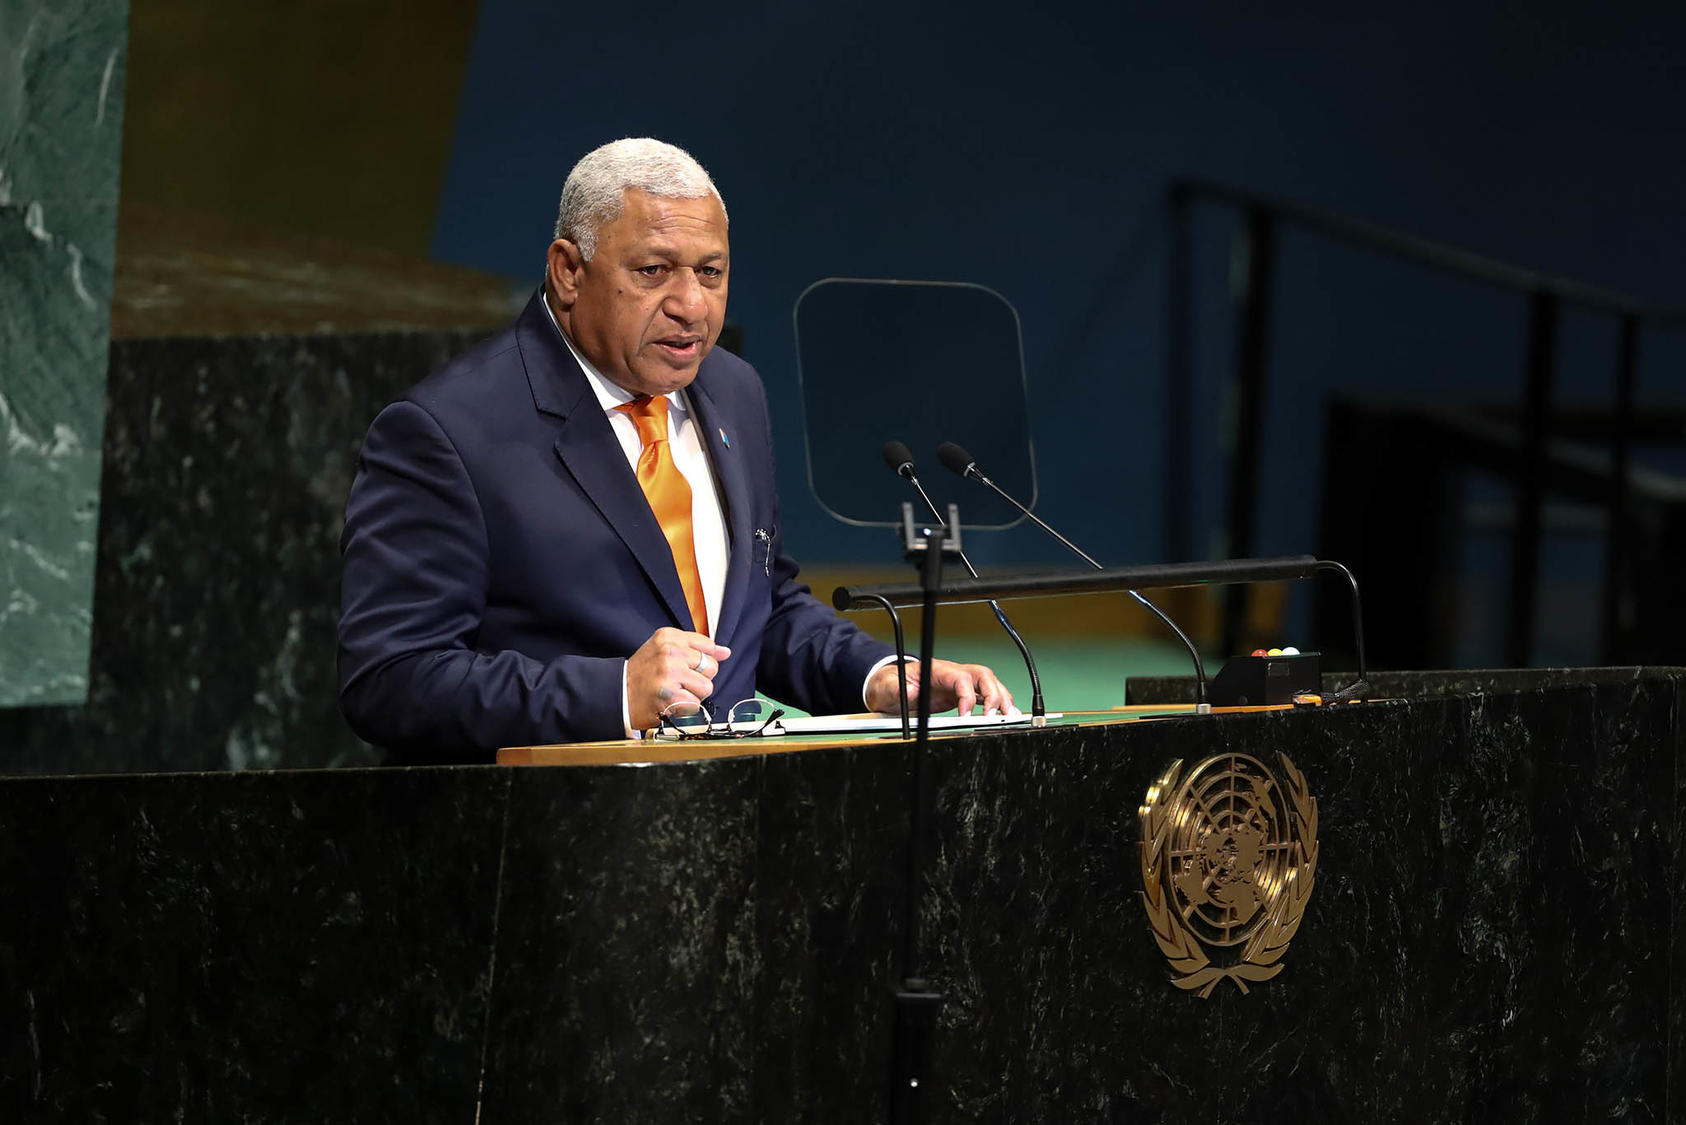 Fiji Prime Minister Frank Bainimarama addresses the U.N. General Assembly in New York City. September 28, 2018. (Chang W. Lee/The New York Times)